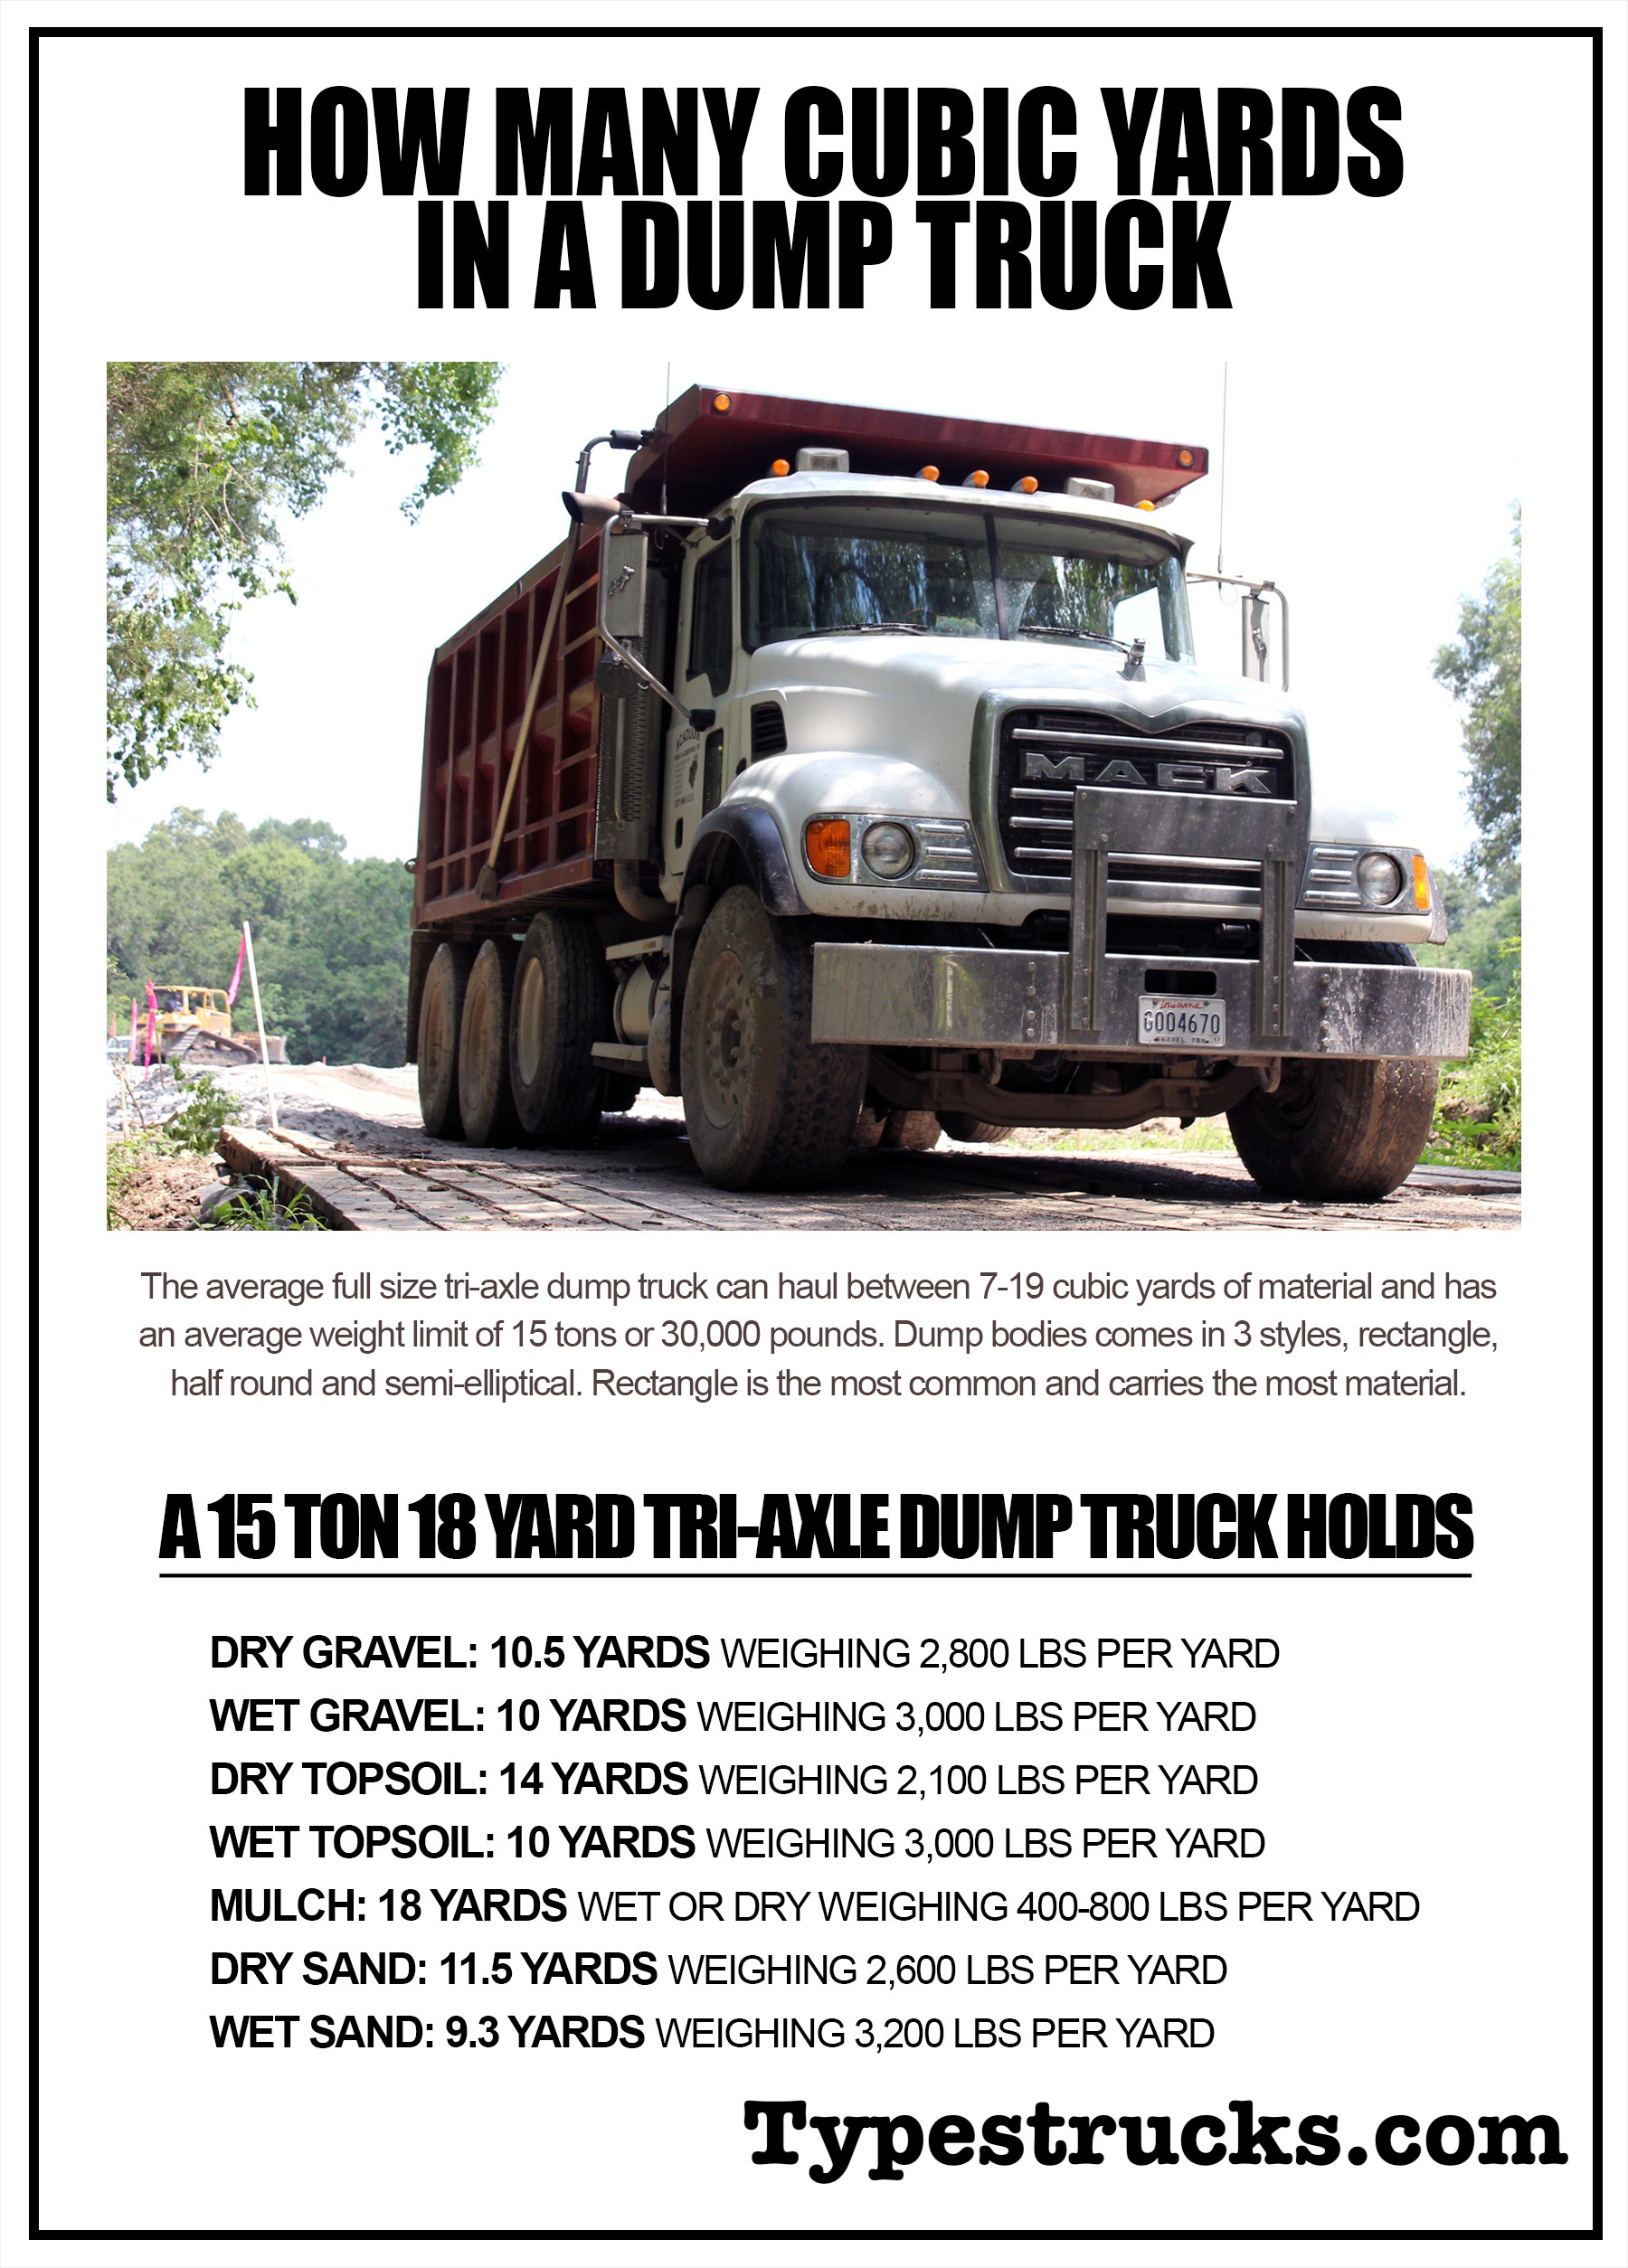 How Many Cubic Yards of Soil in A Dump Truck?